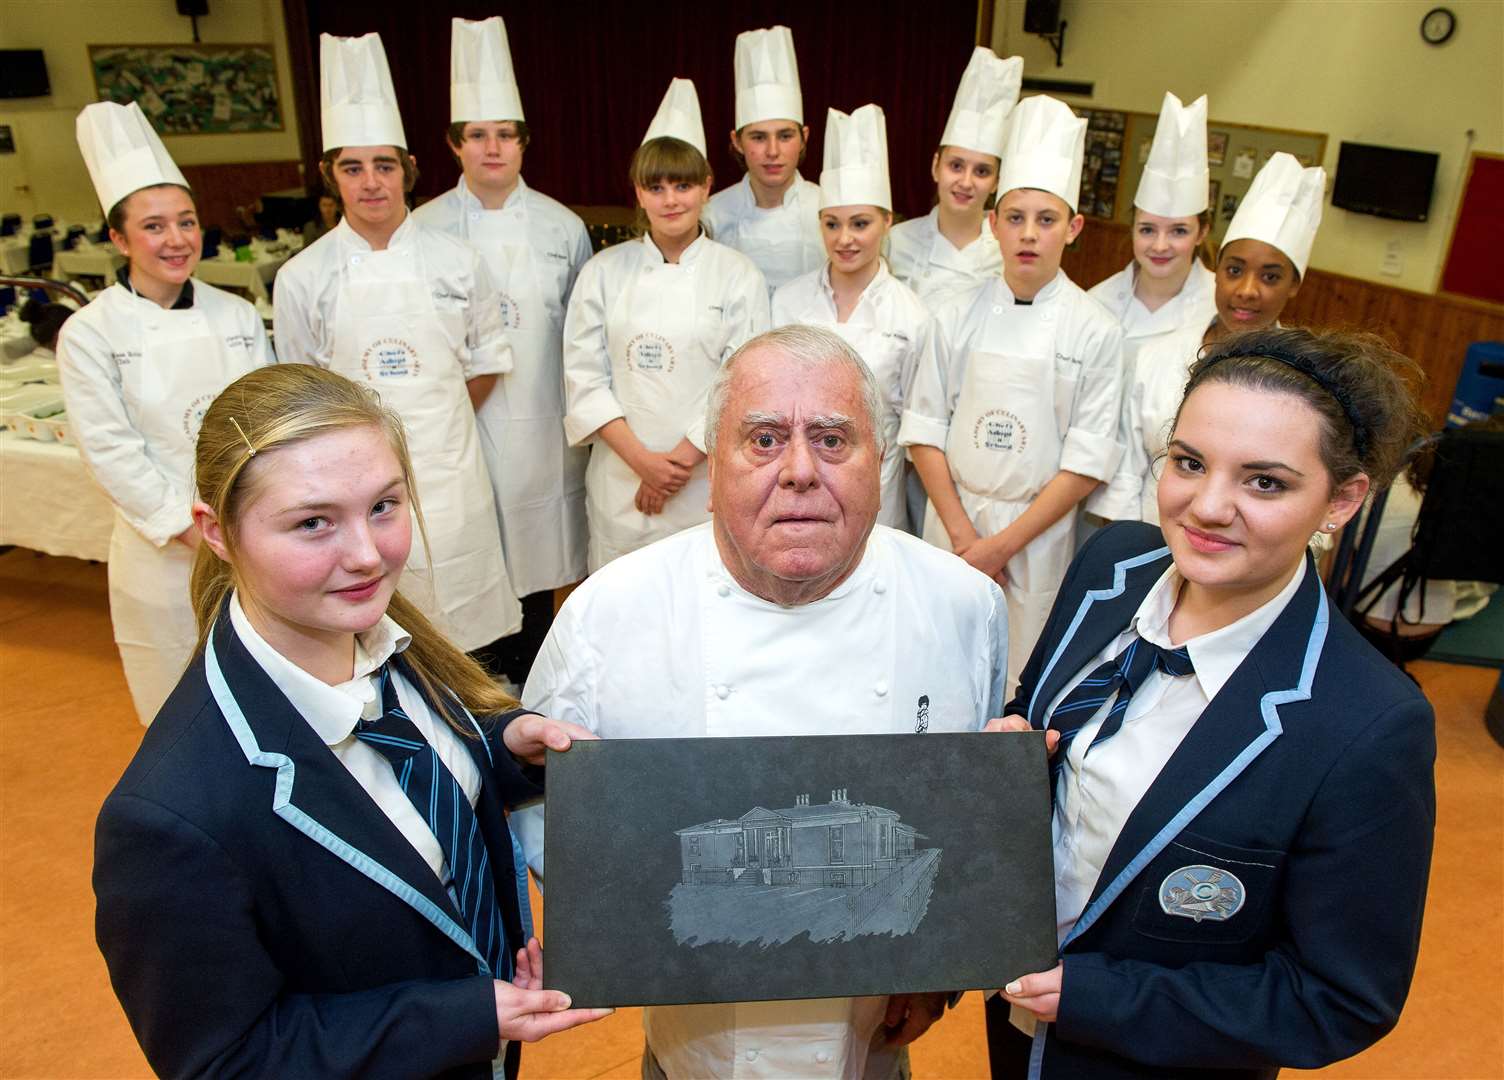 Albert Roux being presented with a plaque by Charleston Academy pupils Amy Anderson and Rachael Armitage at a gala dinner in 2012.